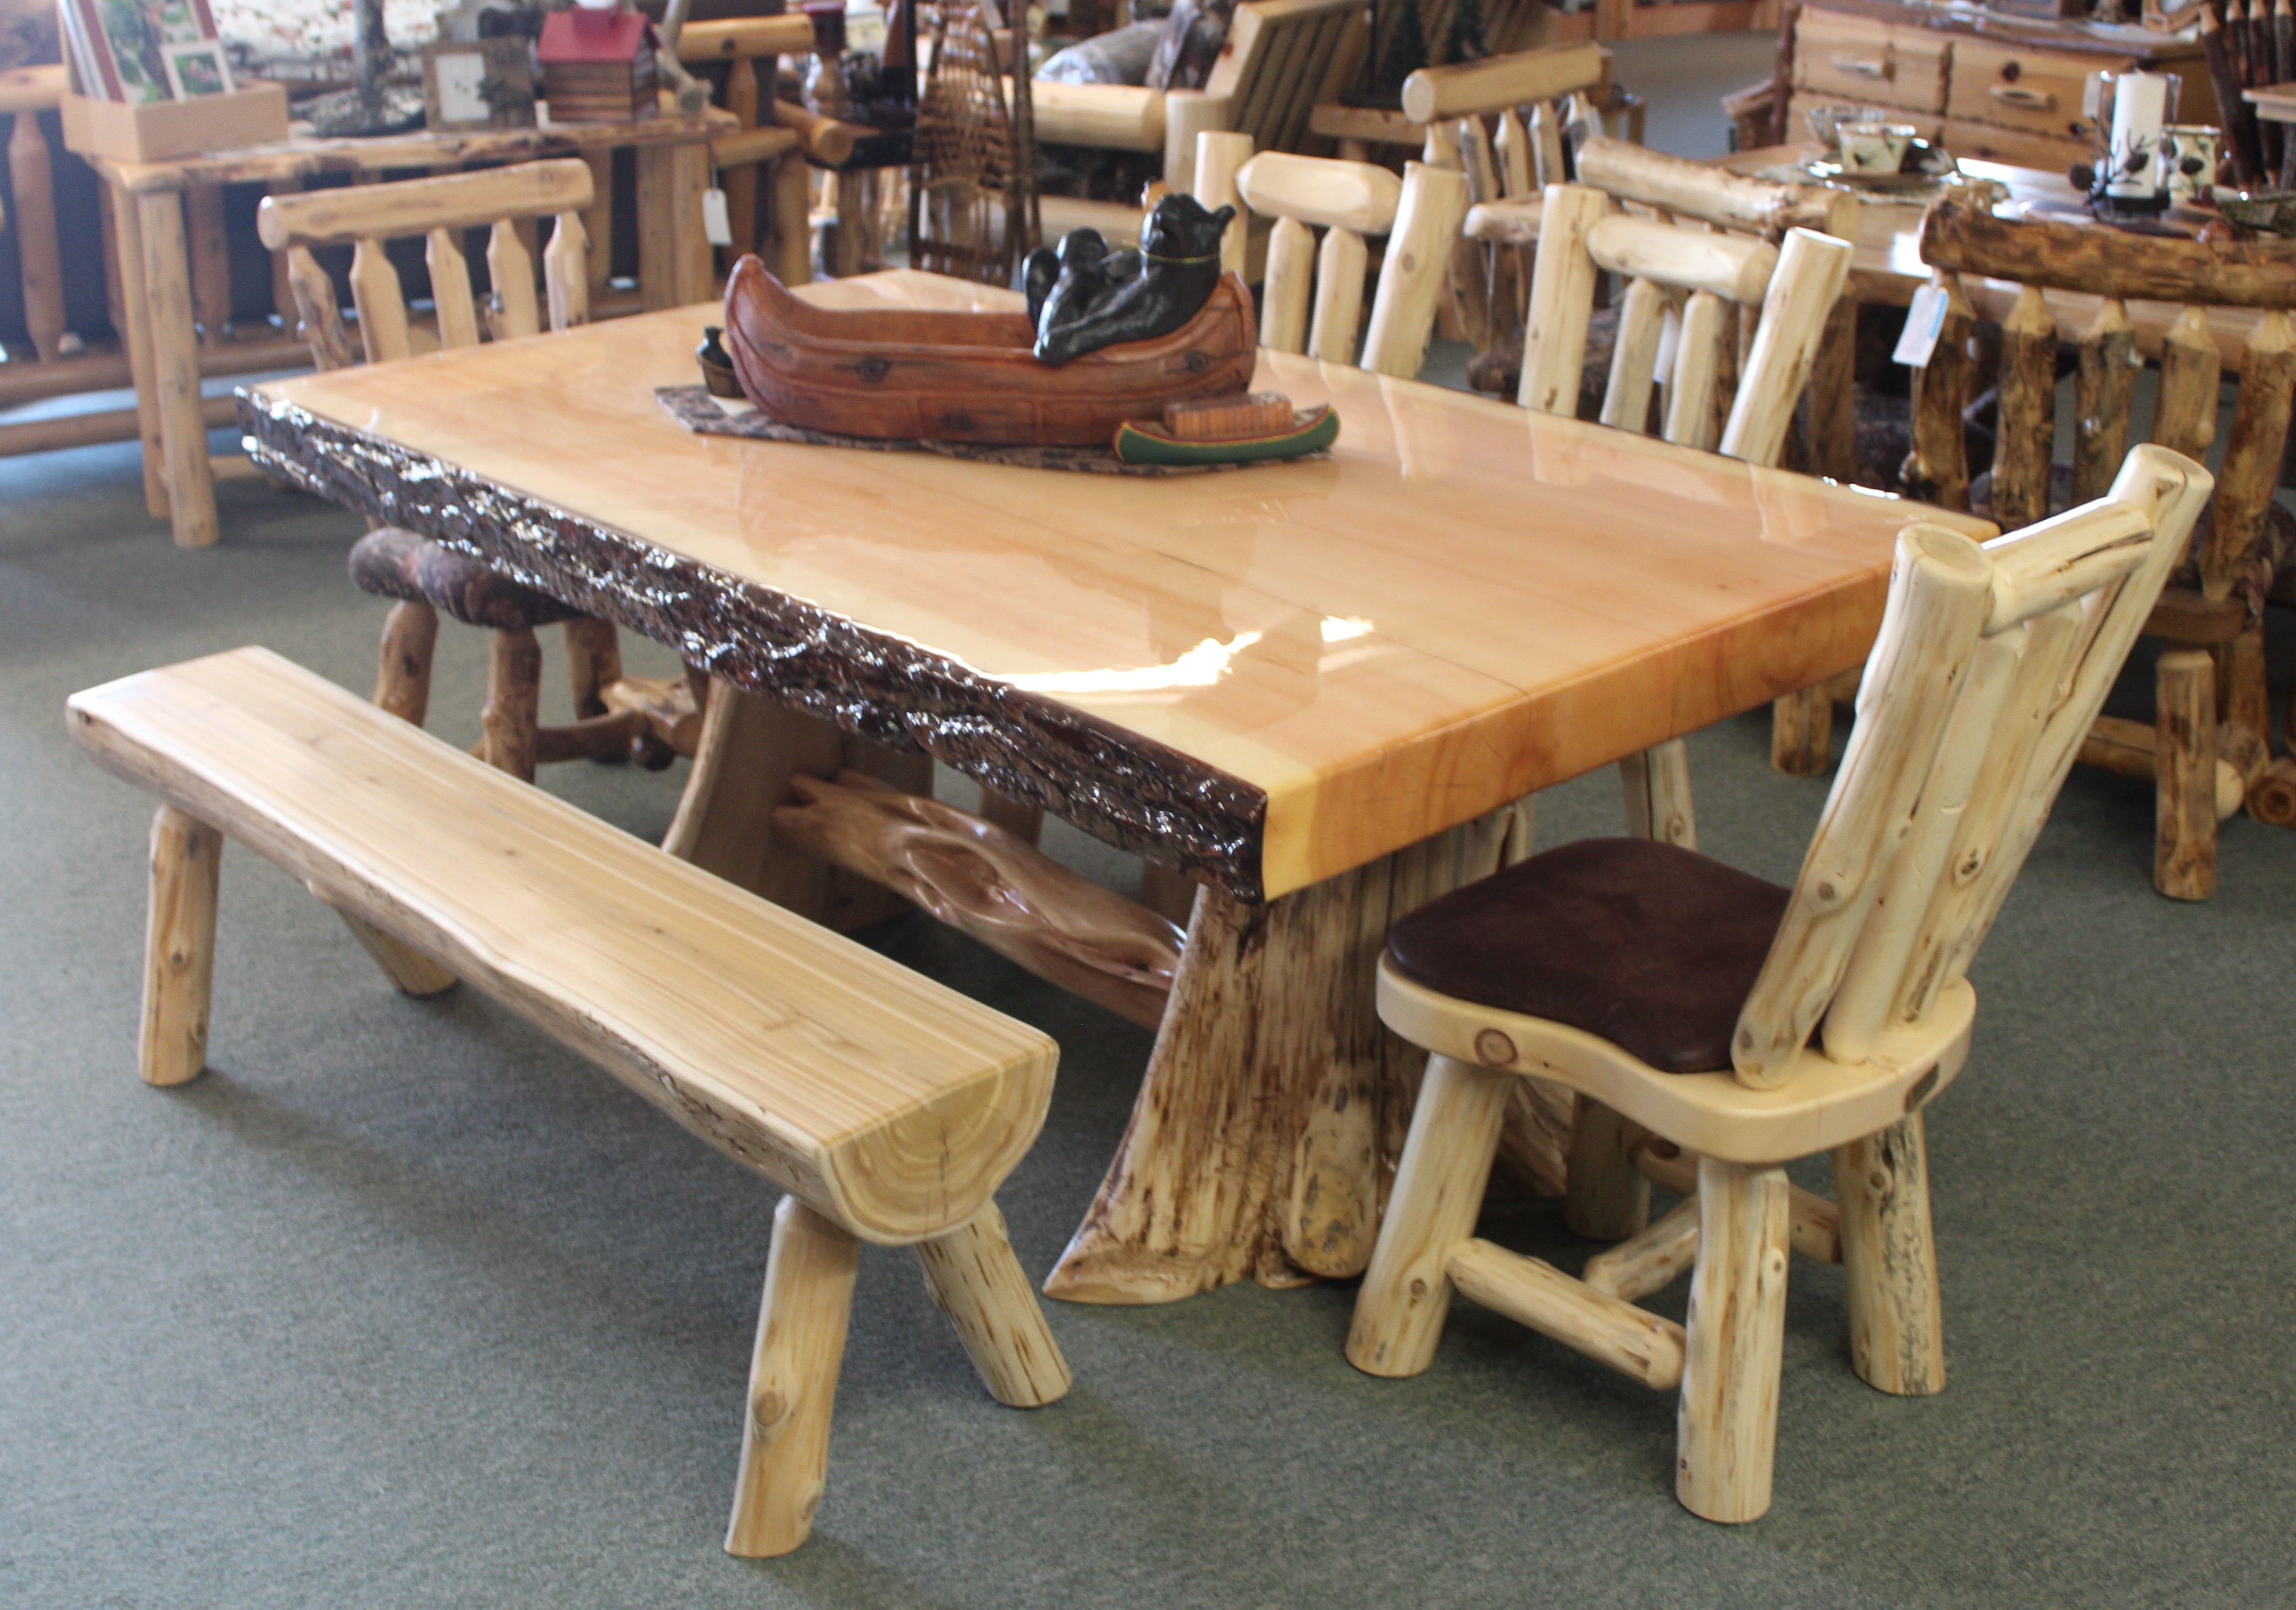 Log table and chairs